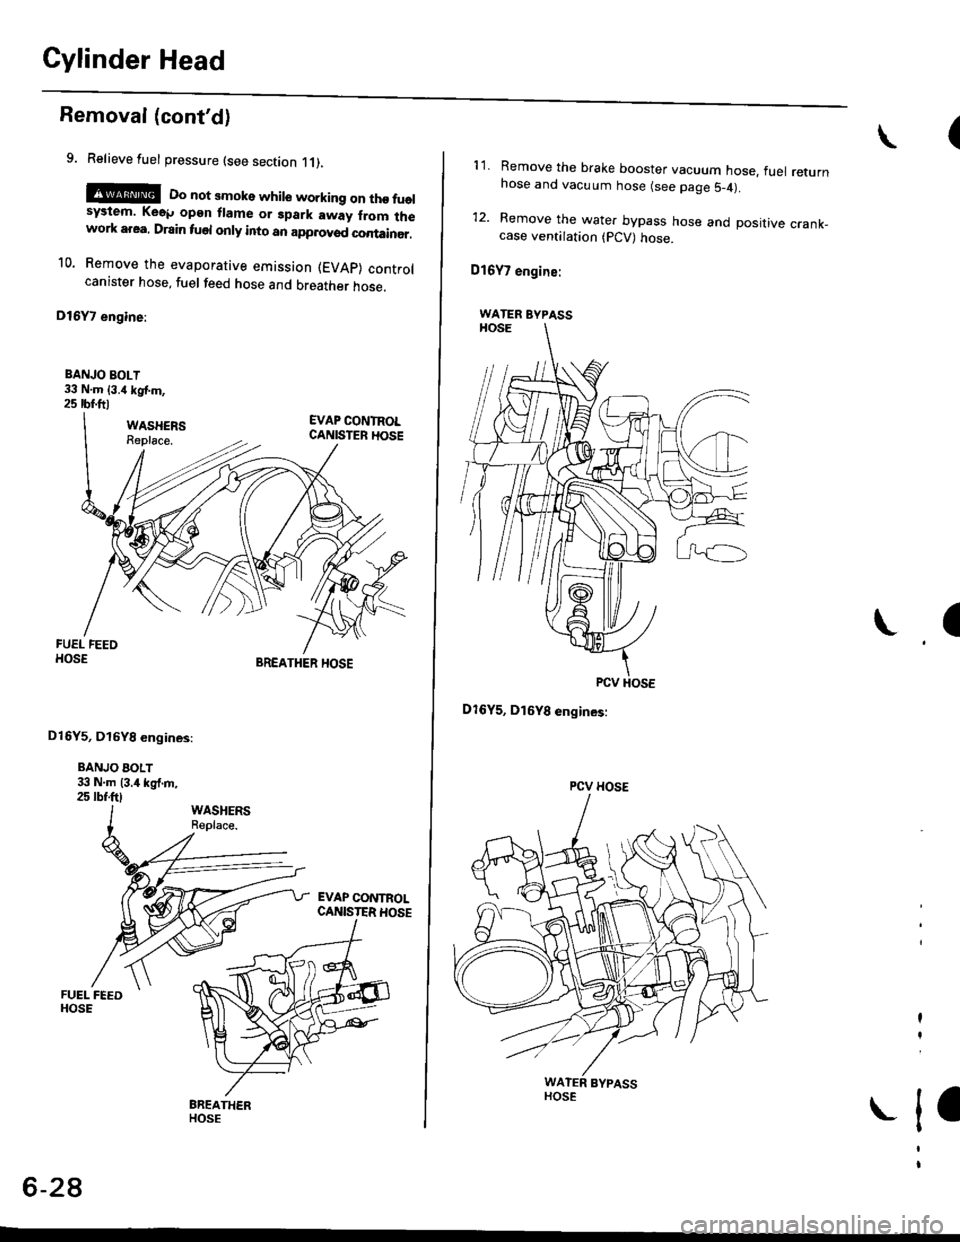 HONDA CIVIC 1997 6.G Service Manual Cylinder Head
Removal (contd)
9. Relieve fuel pressure (see section 11),
E@E Do not smoke while working on tho fuelsystem. Ke6p opgn flame or gpark away from lhework area, Drain fuel only into an app